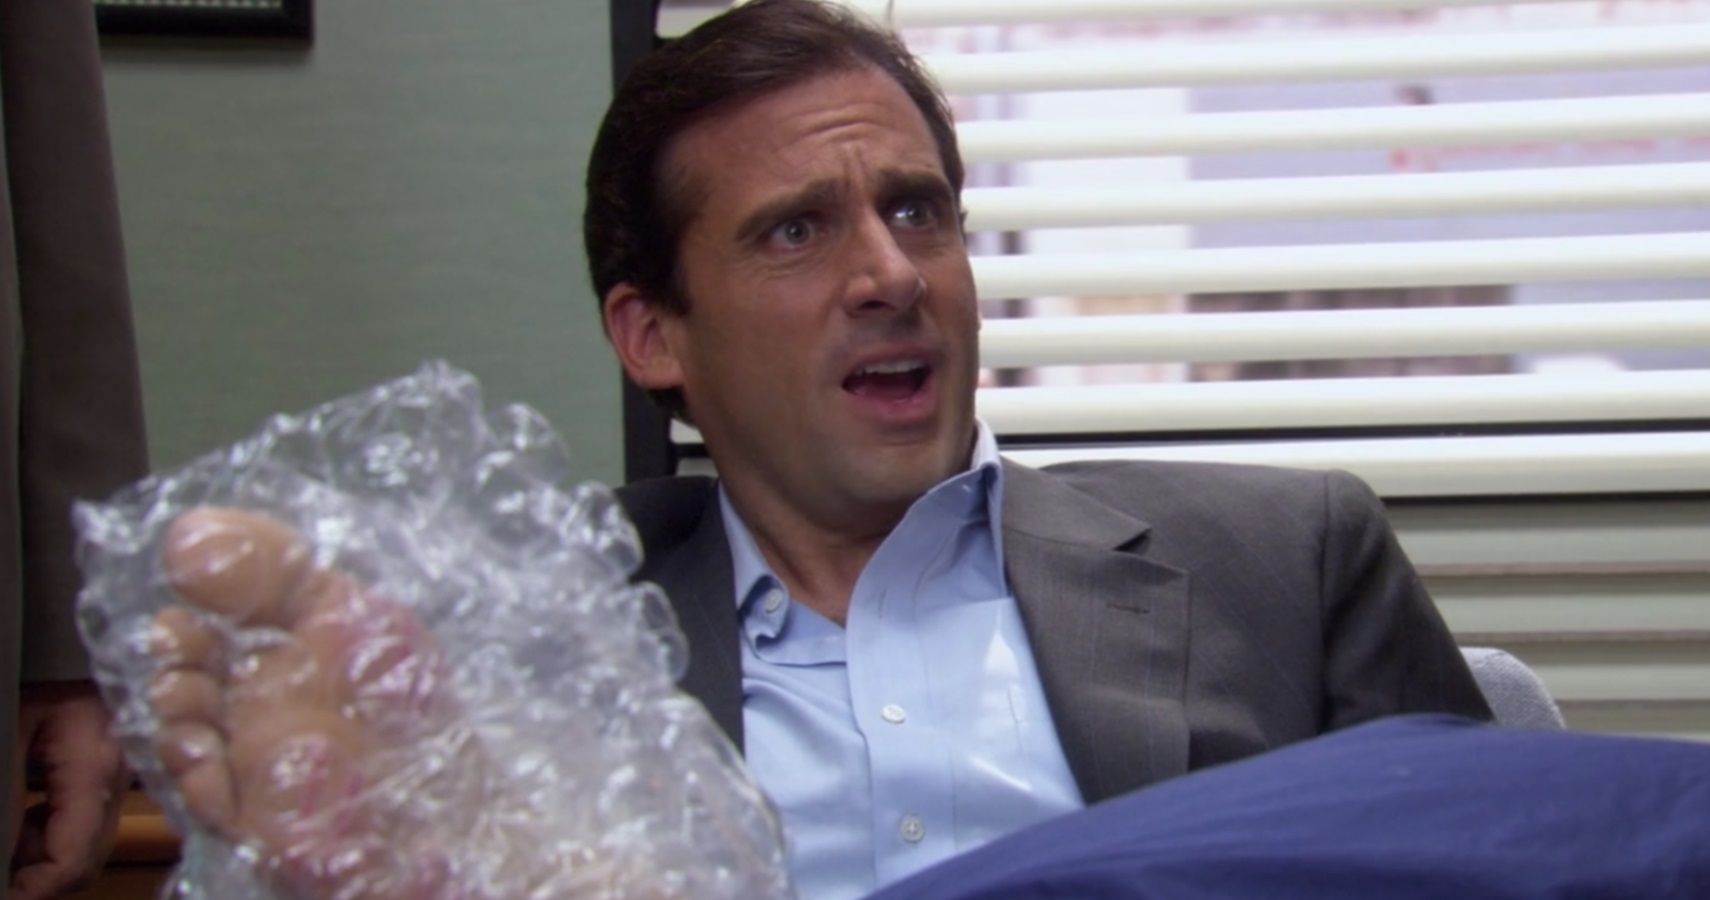 Which The Office Episode Should You Watch Based On Your Mood